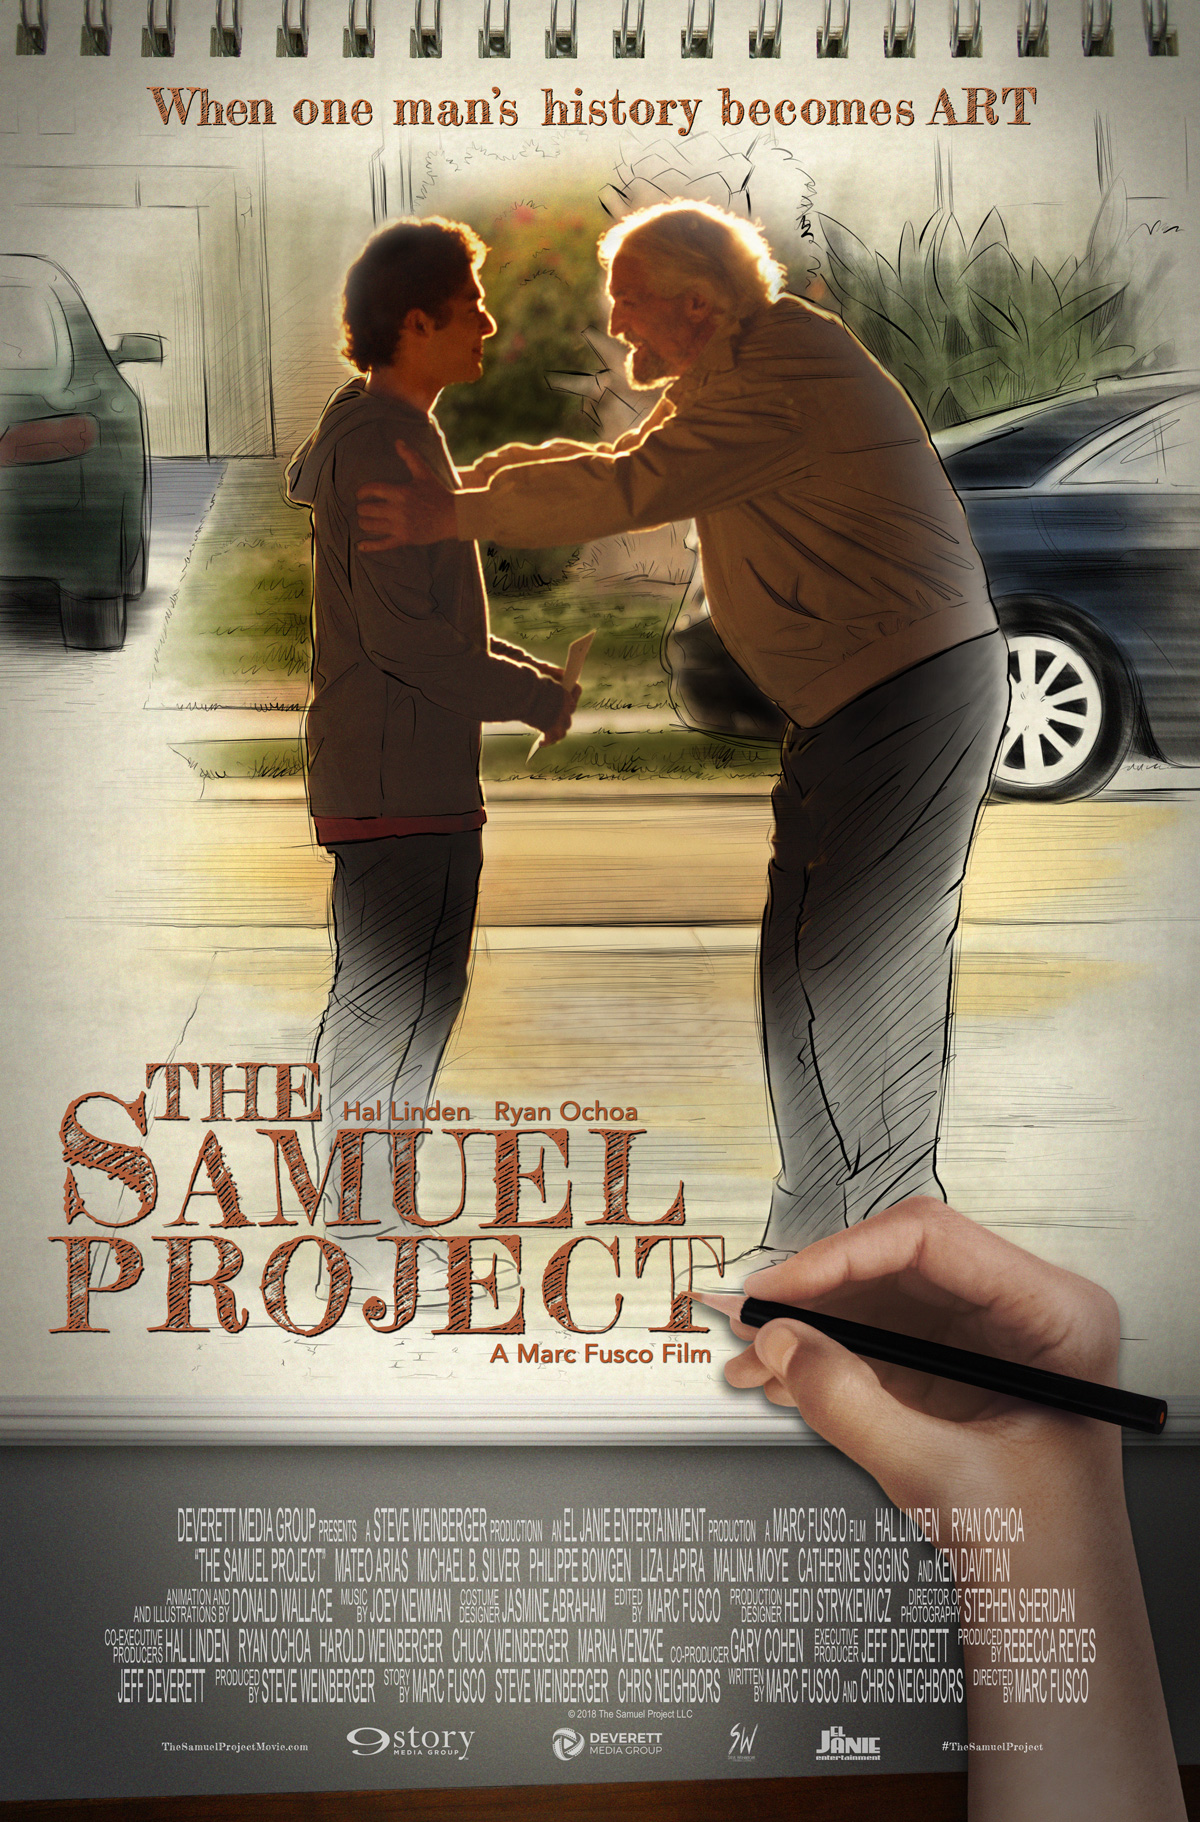 The Samuel Project (2018)